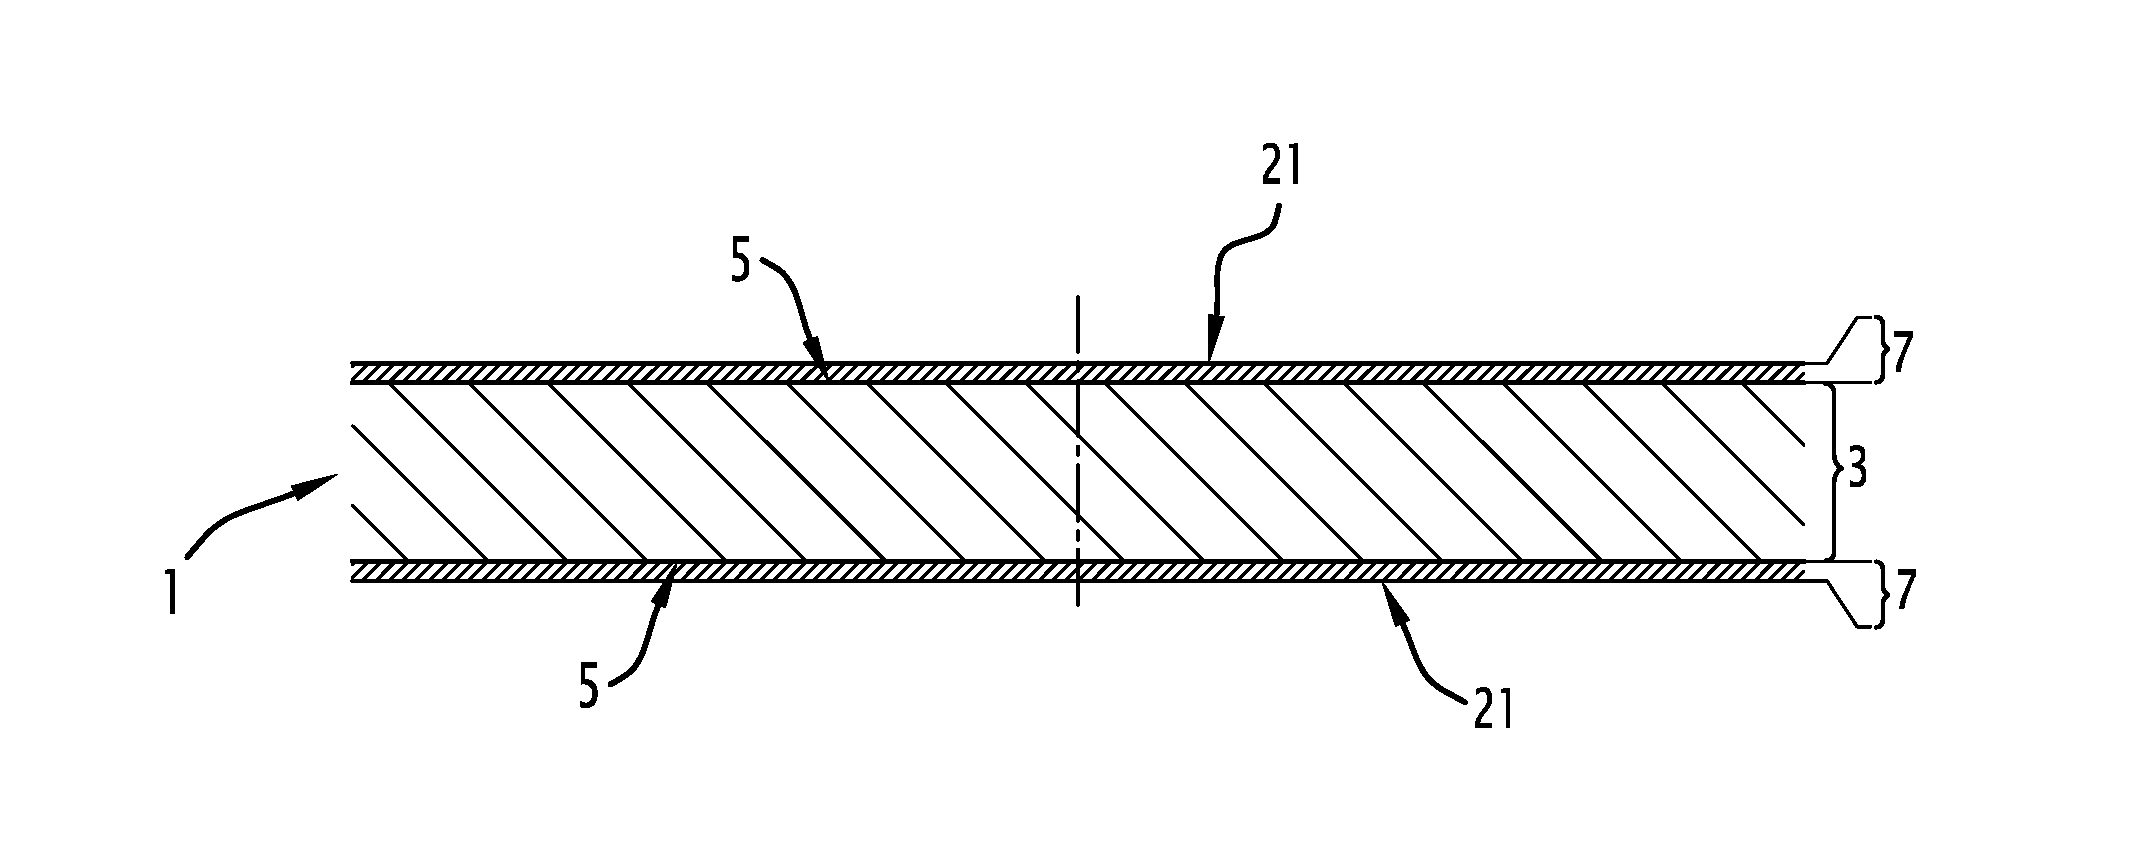 Method for Manufacturing Parts with a Low Waviness from an Electrogalvanized Metal Sheet, Corresponding Part and Vehicle